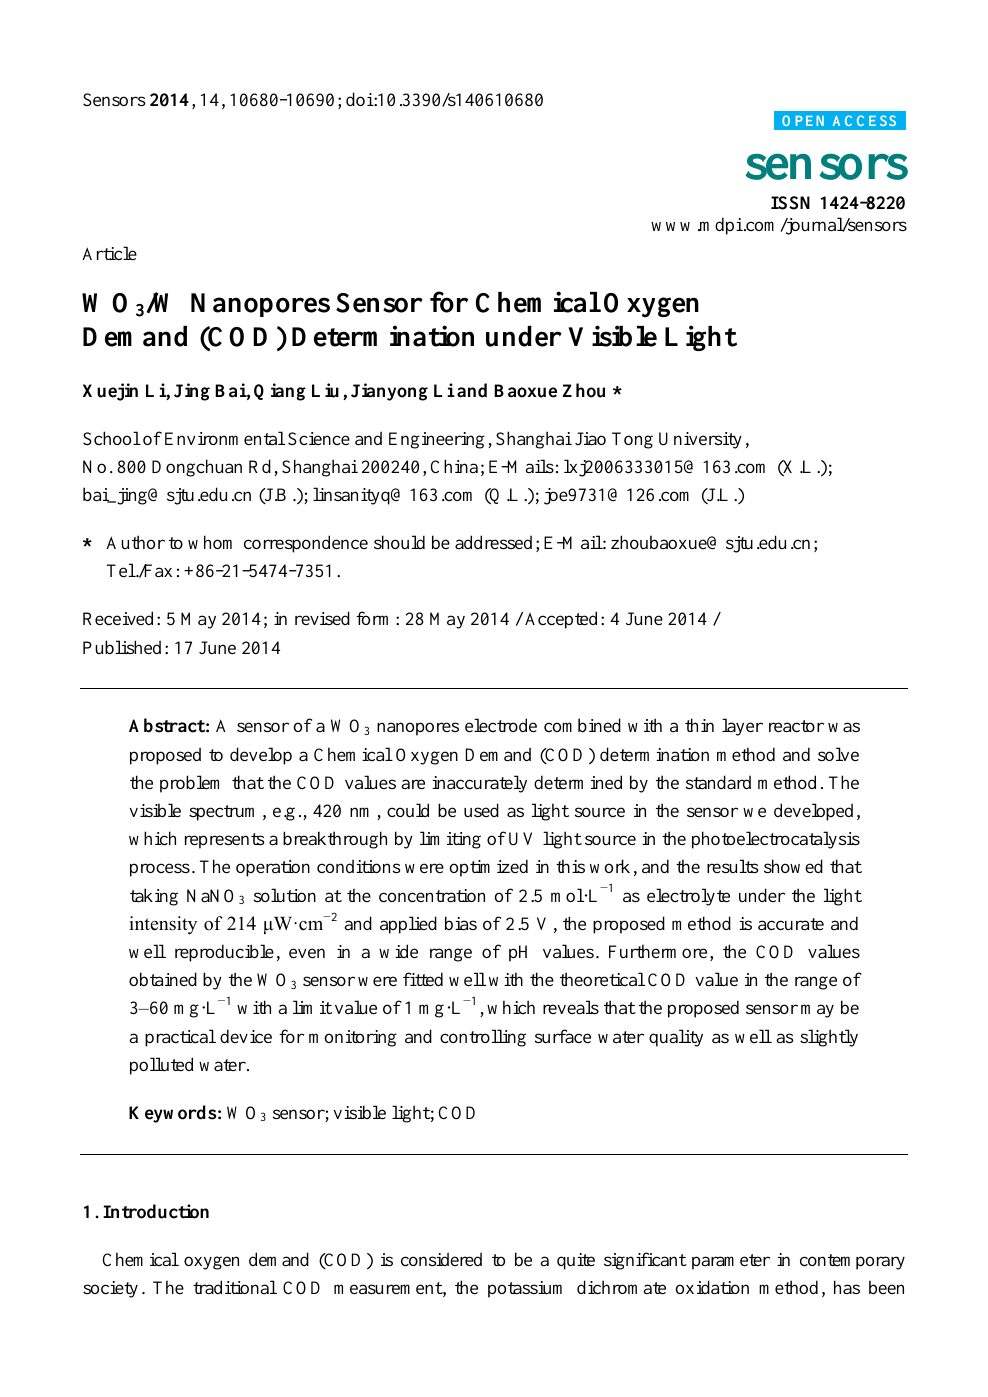 Wo3 W Nanopores Sensor For Chemical Oxygen Demand Cod Determination Under Visible Light Topic Of Research Paper In Chemical Sciences Download Scholarly Article Pdf And Read For Free On Cyberleninka Open Science